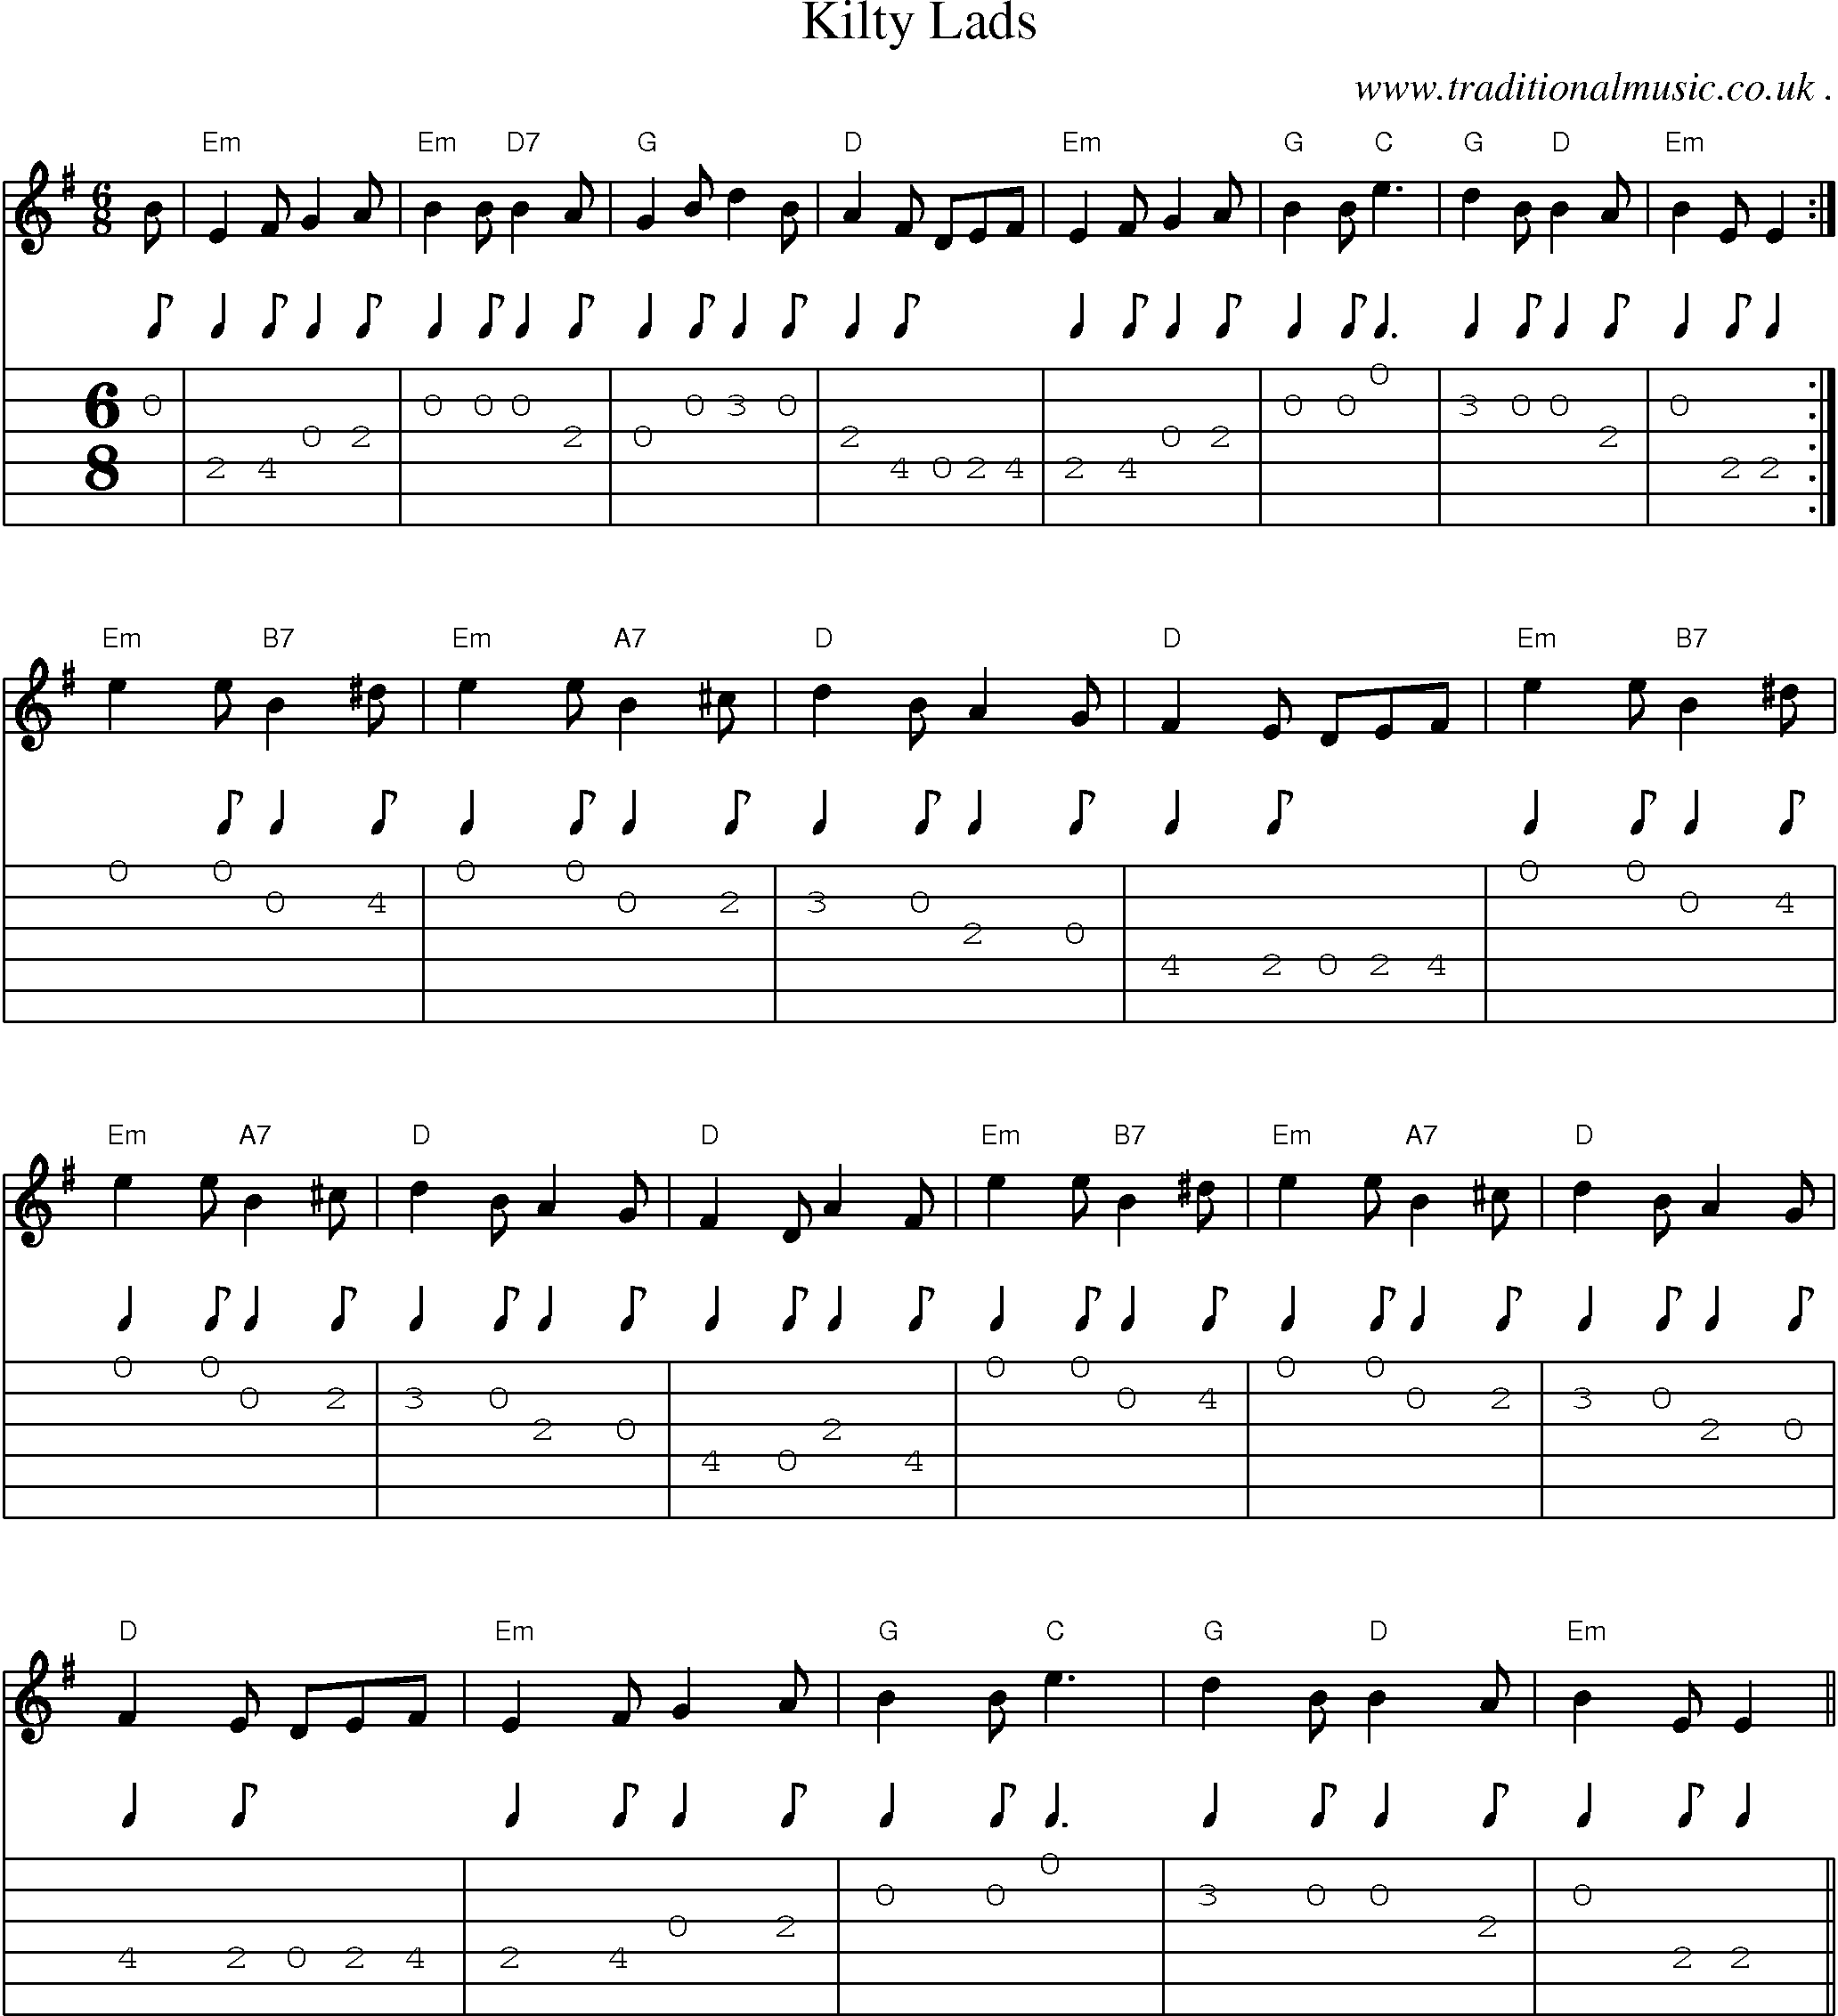 Sheet-Music and Guitar Tabs for Kilty Lads